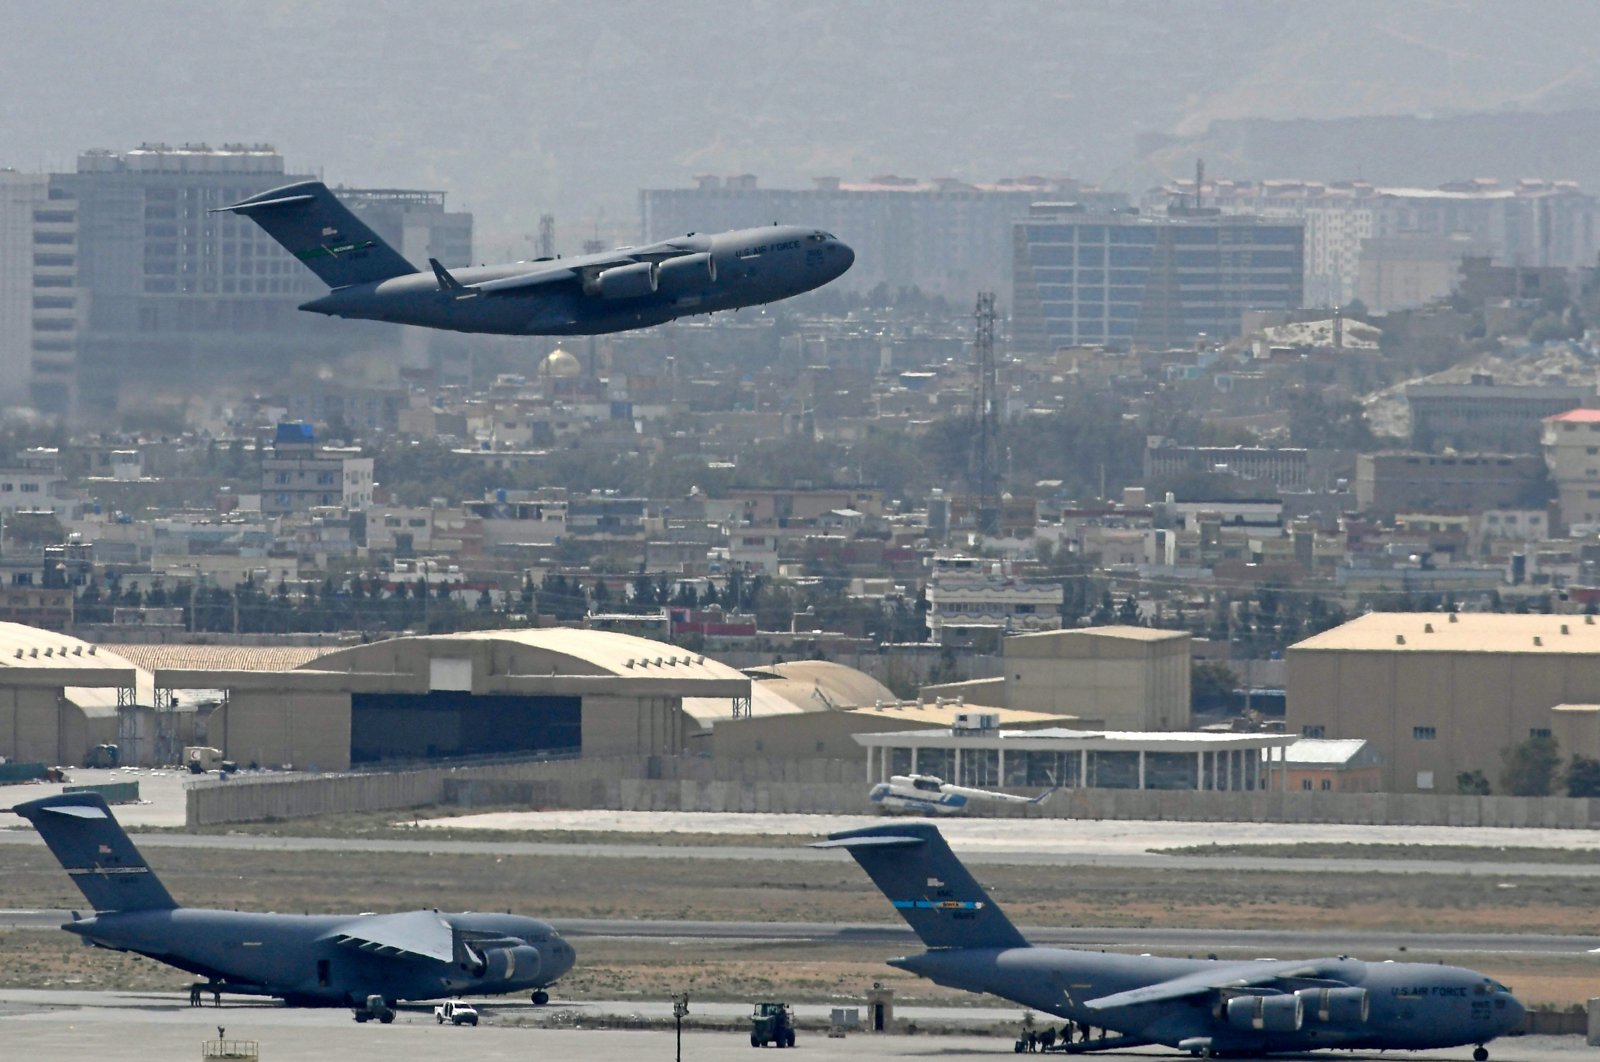 In this file photo taken on August 30, 2021, an US Air Force aircraft takes off from the airport in Kabul. (AFP Photo)